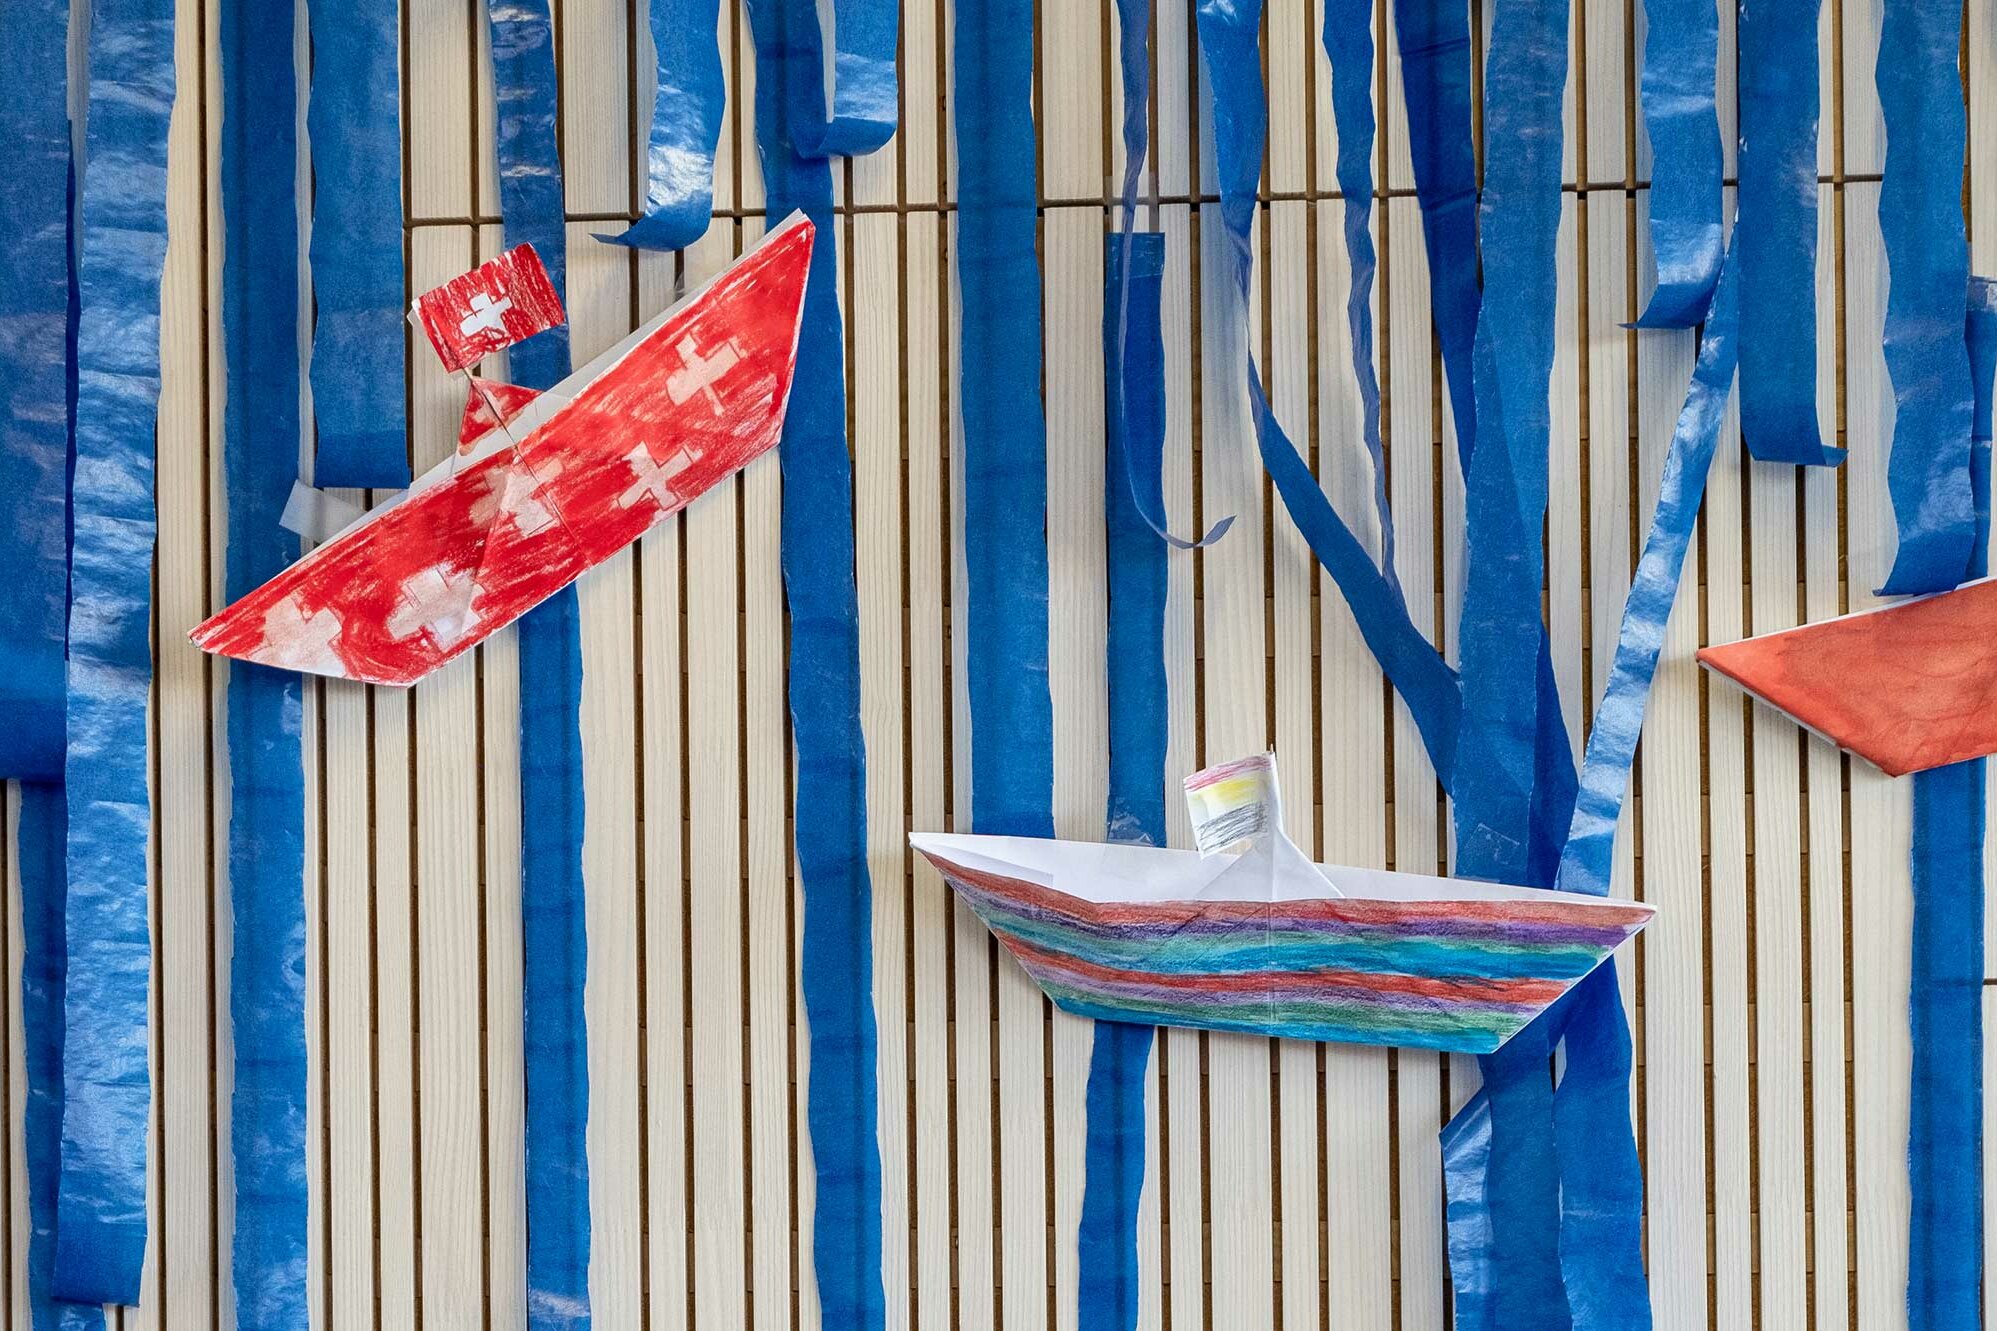 Self-made, painted paper boats hang on the wall as decoration. One of the boats is painted with the Swiss flag.	